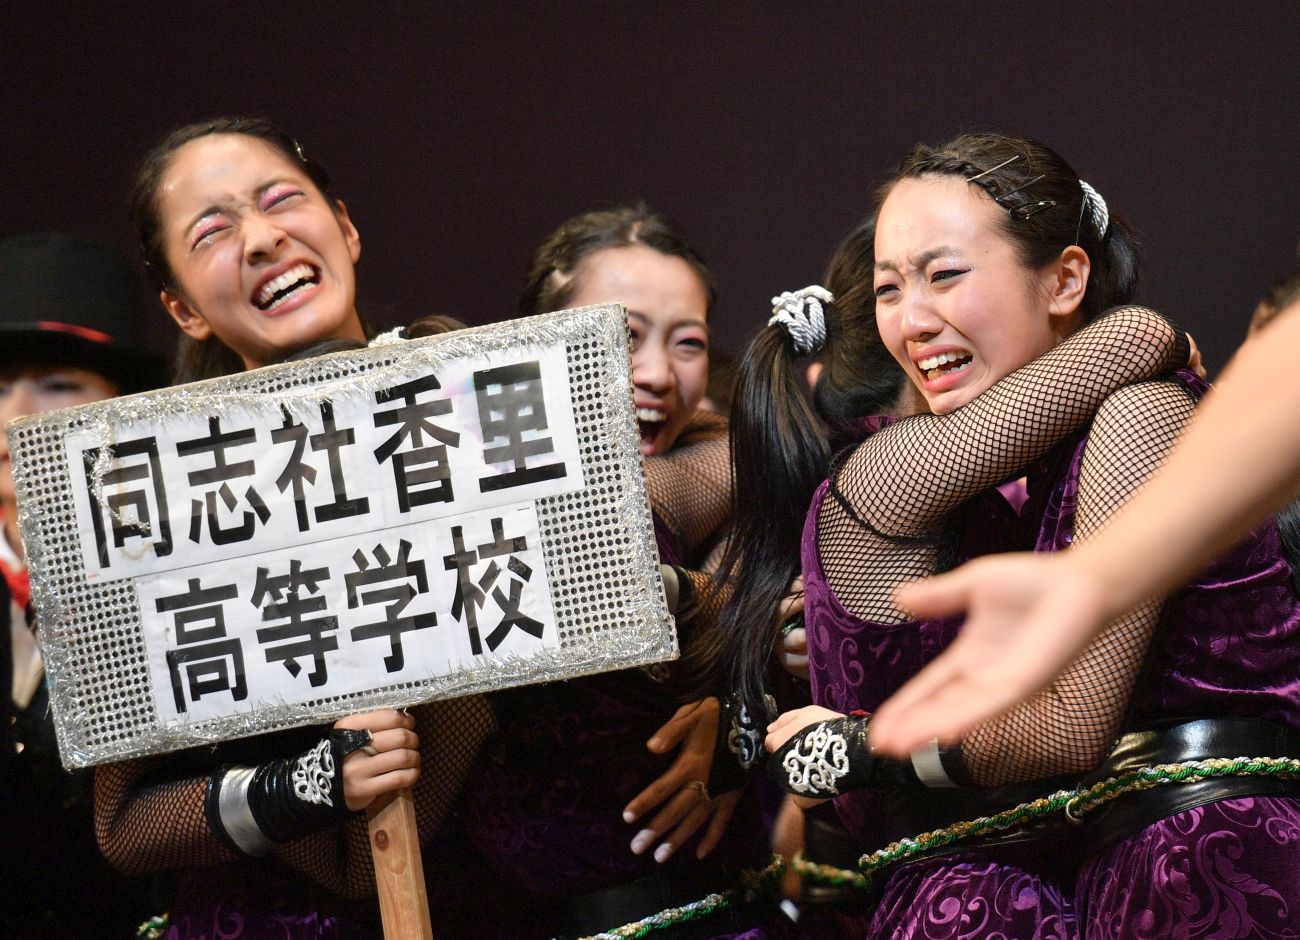 PHOTO AND VIDEO: Japan’s High Schoolers’ Energetic Performances at 11th Super Cup Dance-Off